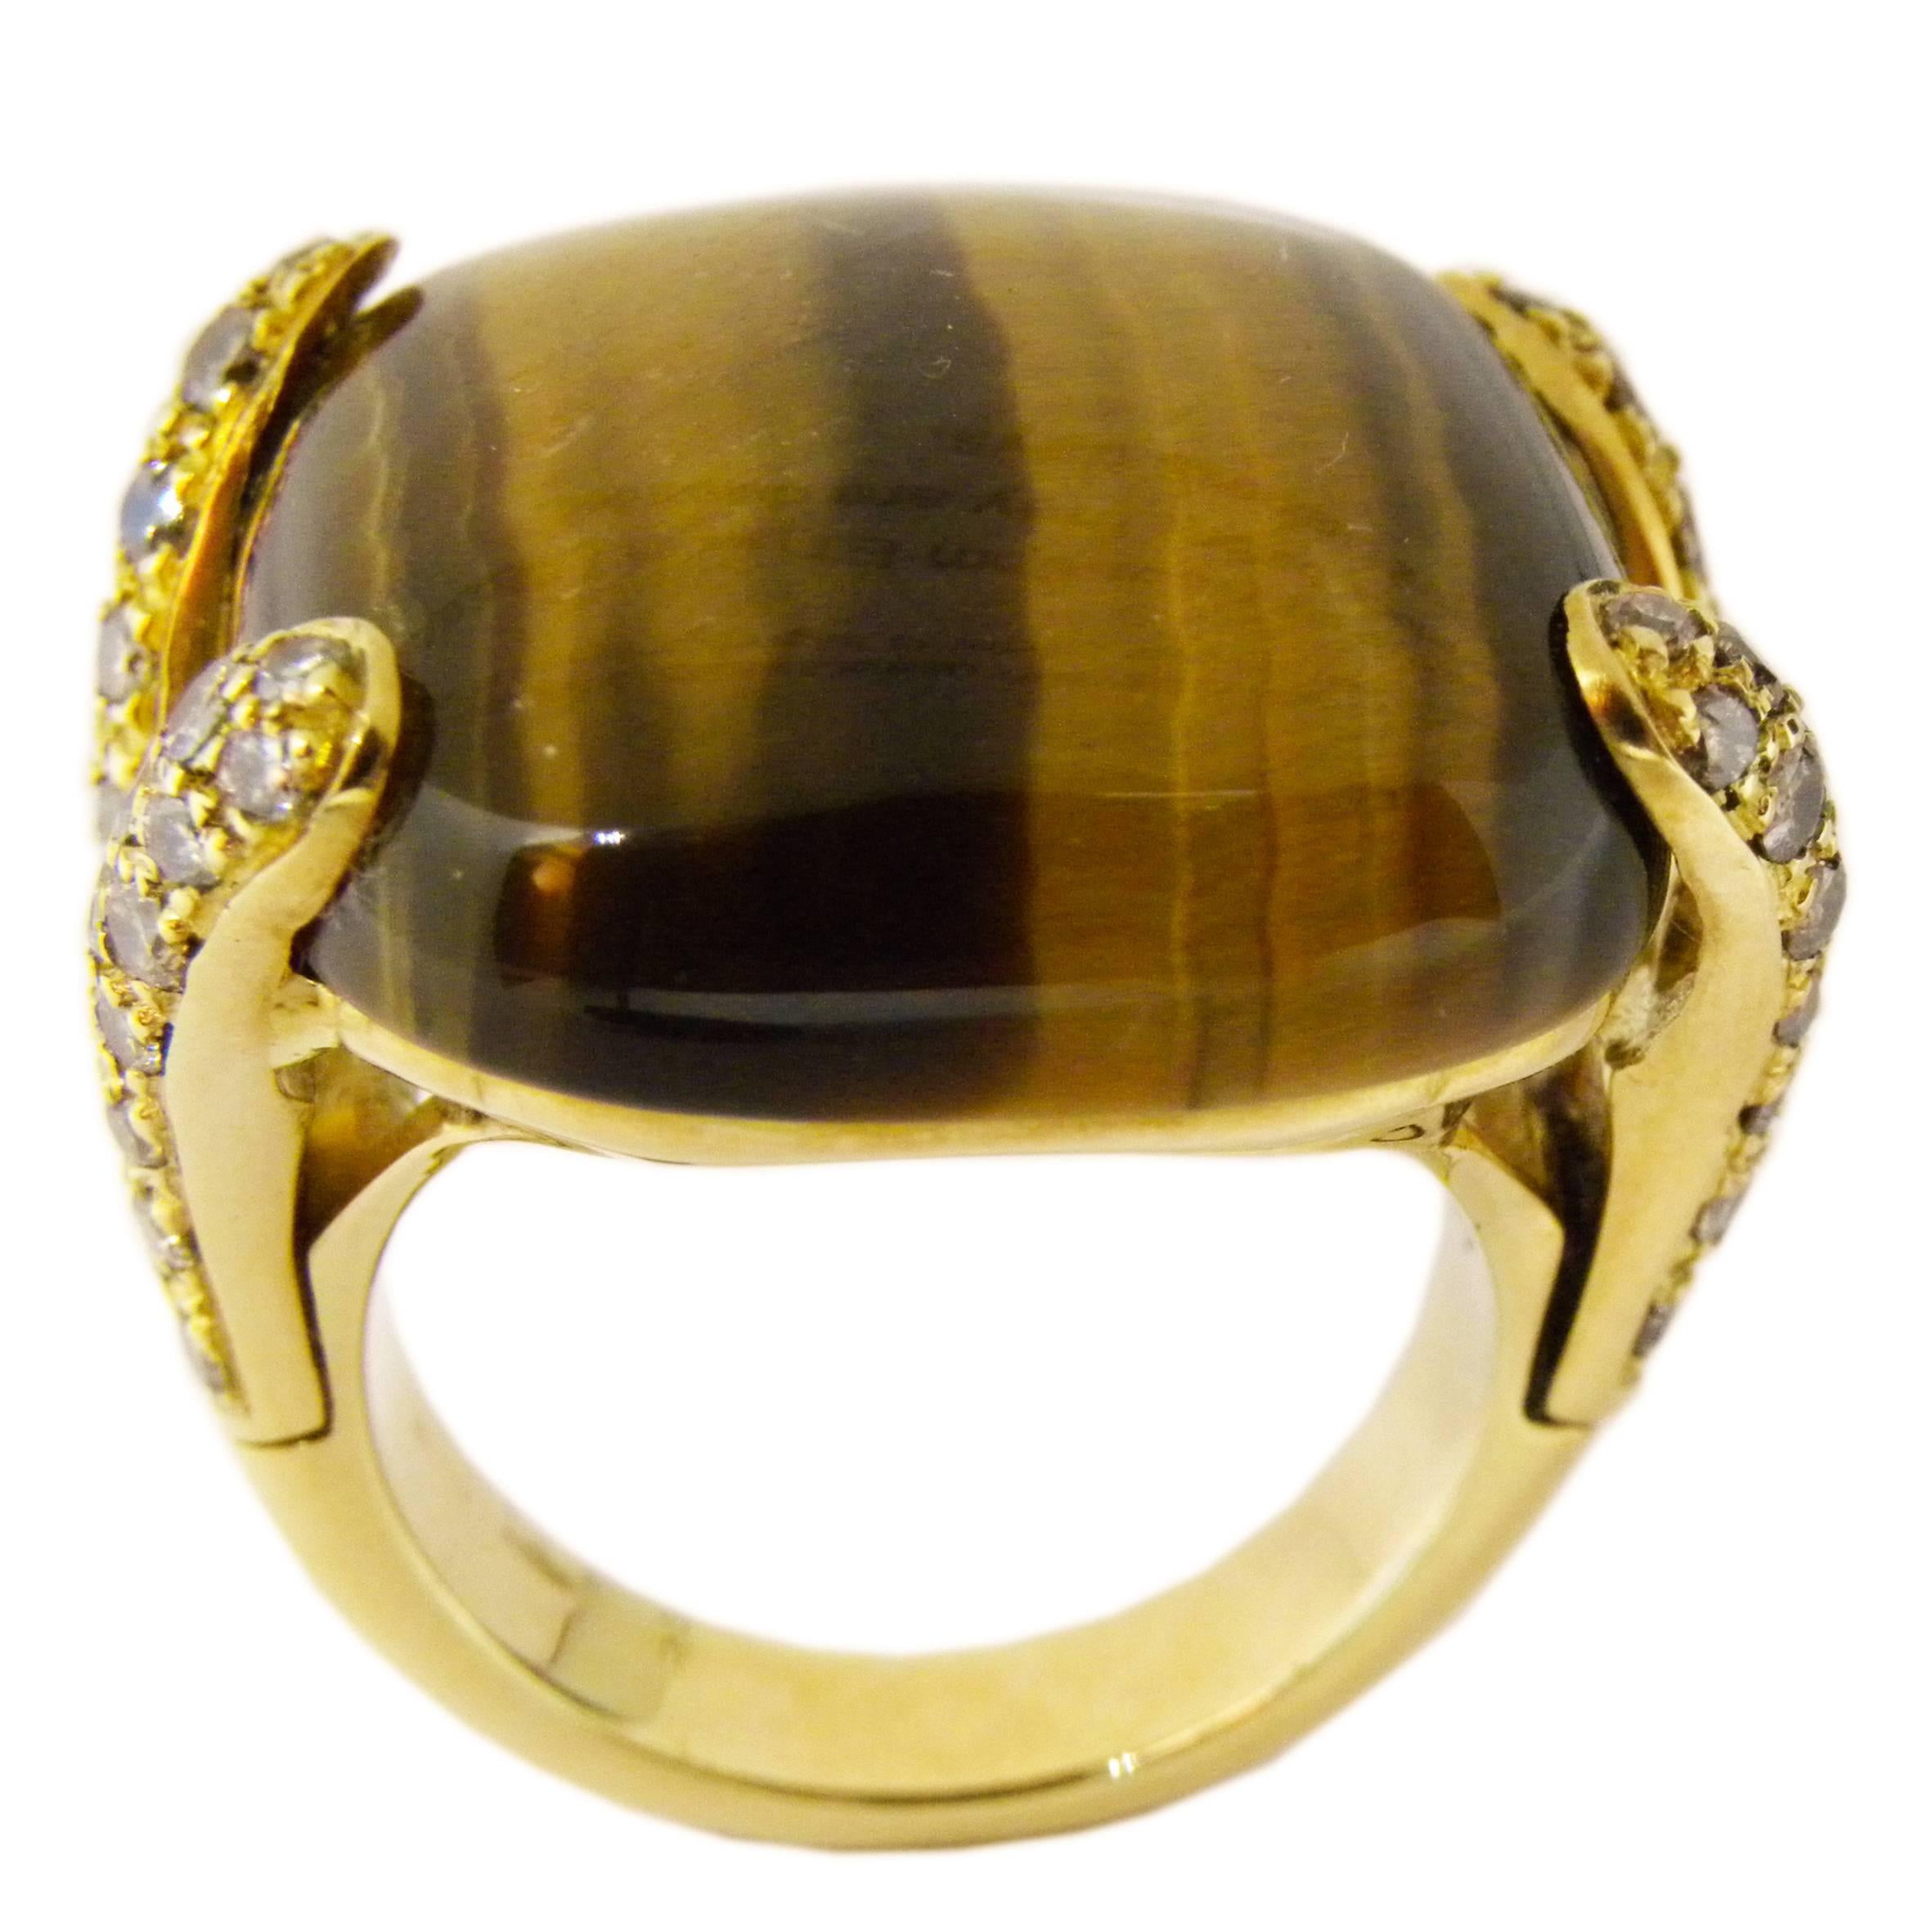 A magic 31.50 Carat Natural Tiger's Eye Cushion Cut in a Champagne Diamond 18K Yellow Gold original 80's setting.

US Size 7 1/4 French Size 55

We offer complimentary resizing on this piece